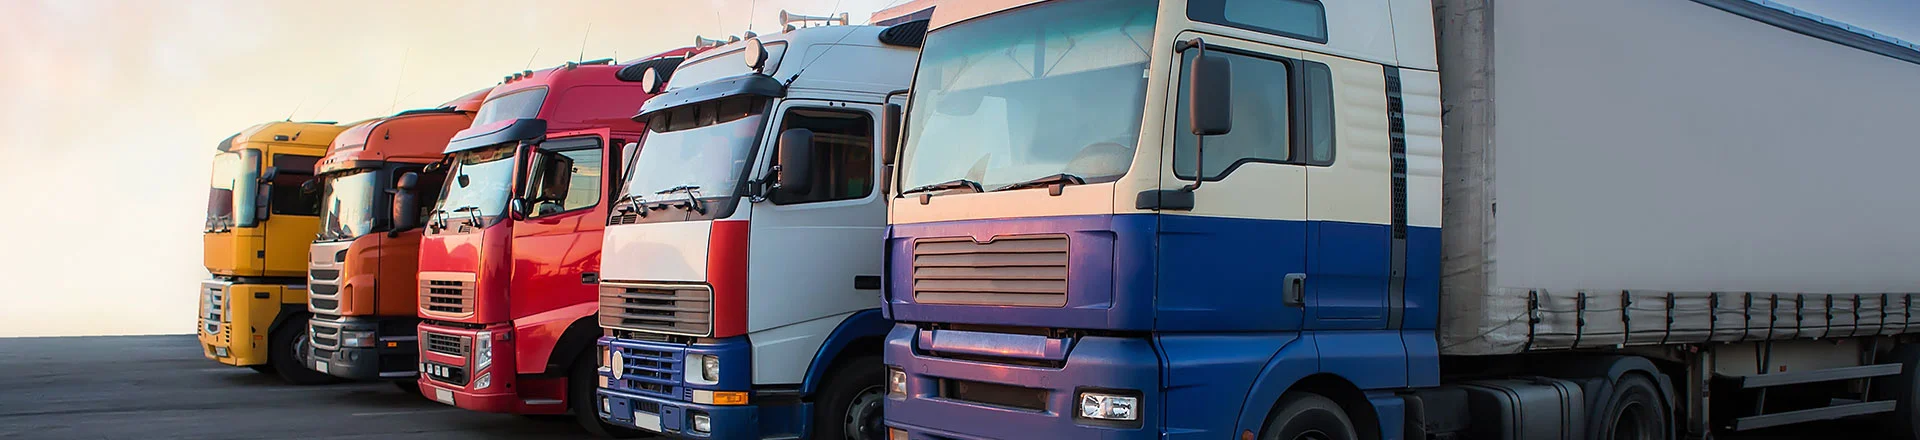 benefits of goods carrying vehicle insurance